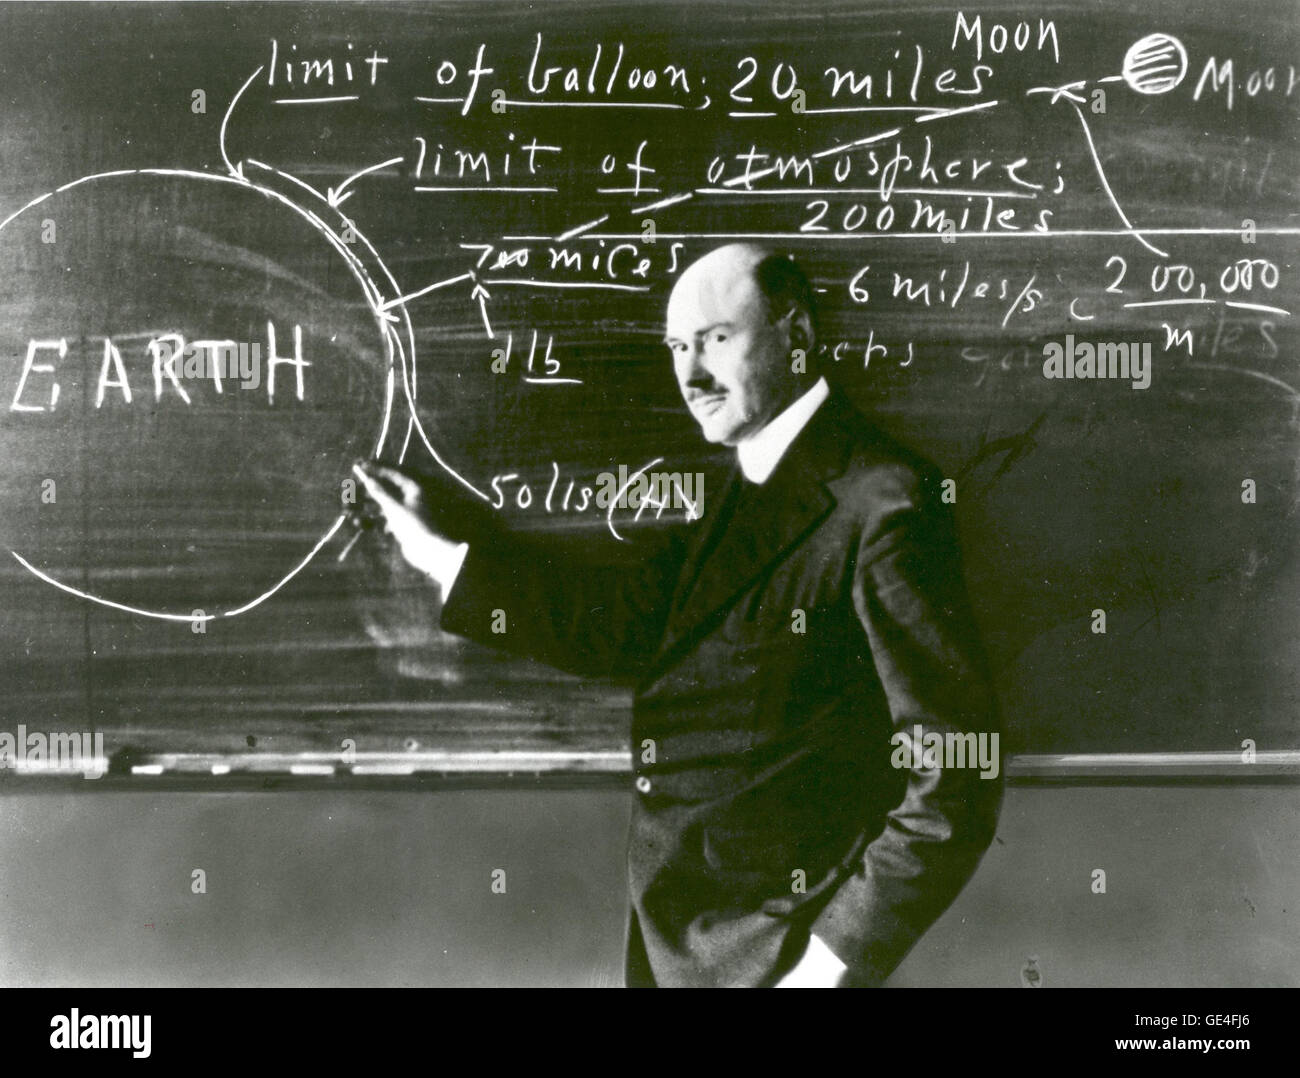 Full Description: Dr. Robert H. Goddard at a blackboard at Clark University in Worcester, Massachusetts, in 1924. Goddard began teaching physics in 1914 at Clark and in 1923 was named the Director of the Physical Laboratory. In 1920 the Smithsonian Institution published his seminal paper A Method for Reaching Extreme Altitudes where he asserted that rockets could be used to send payloads to the Moon. Declaring the absurdity of rockets ever reaching the Moon, the press mocked Goddard and his paper, calling him &quot;Moon Man.&quot; To avoid further scrutiny Goddard eventually moved to New Mexic Stock Photo